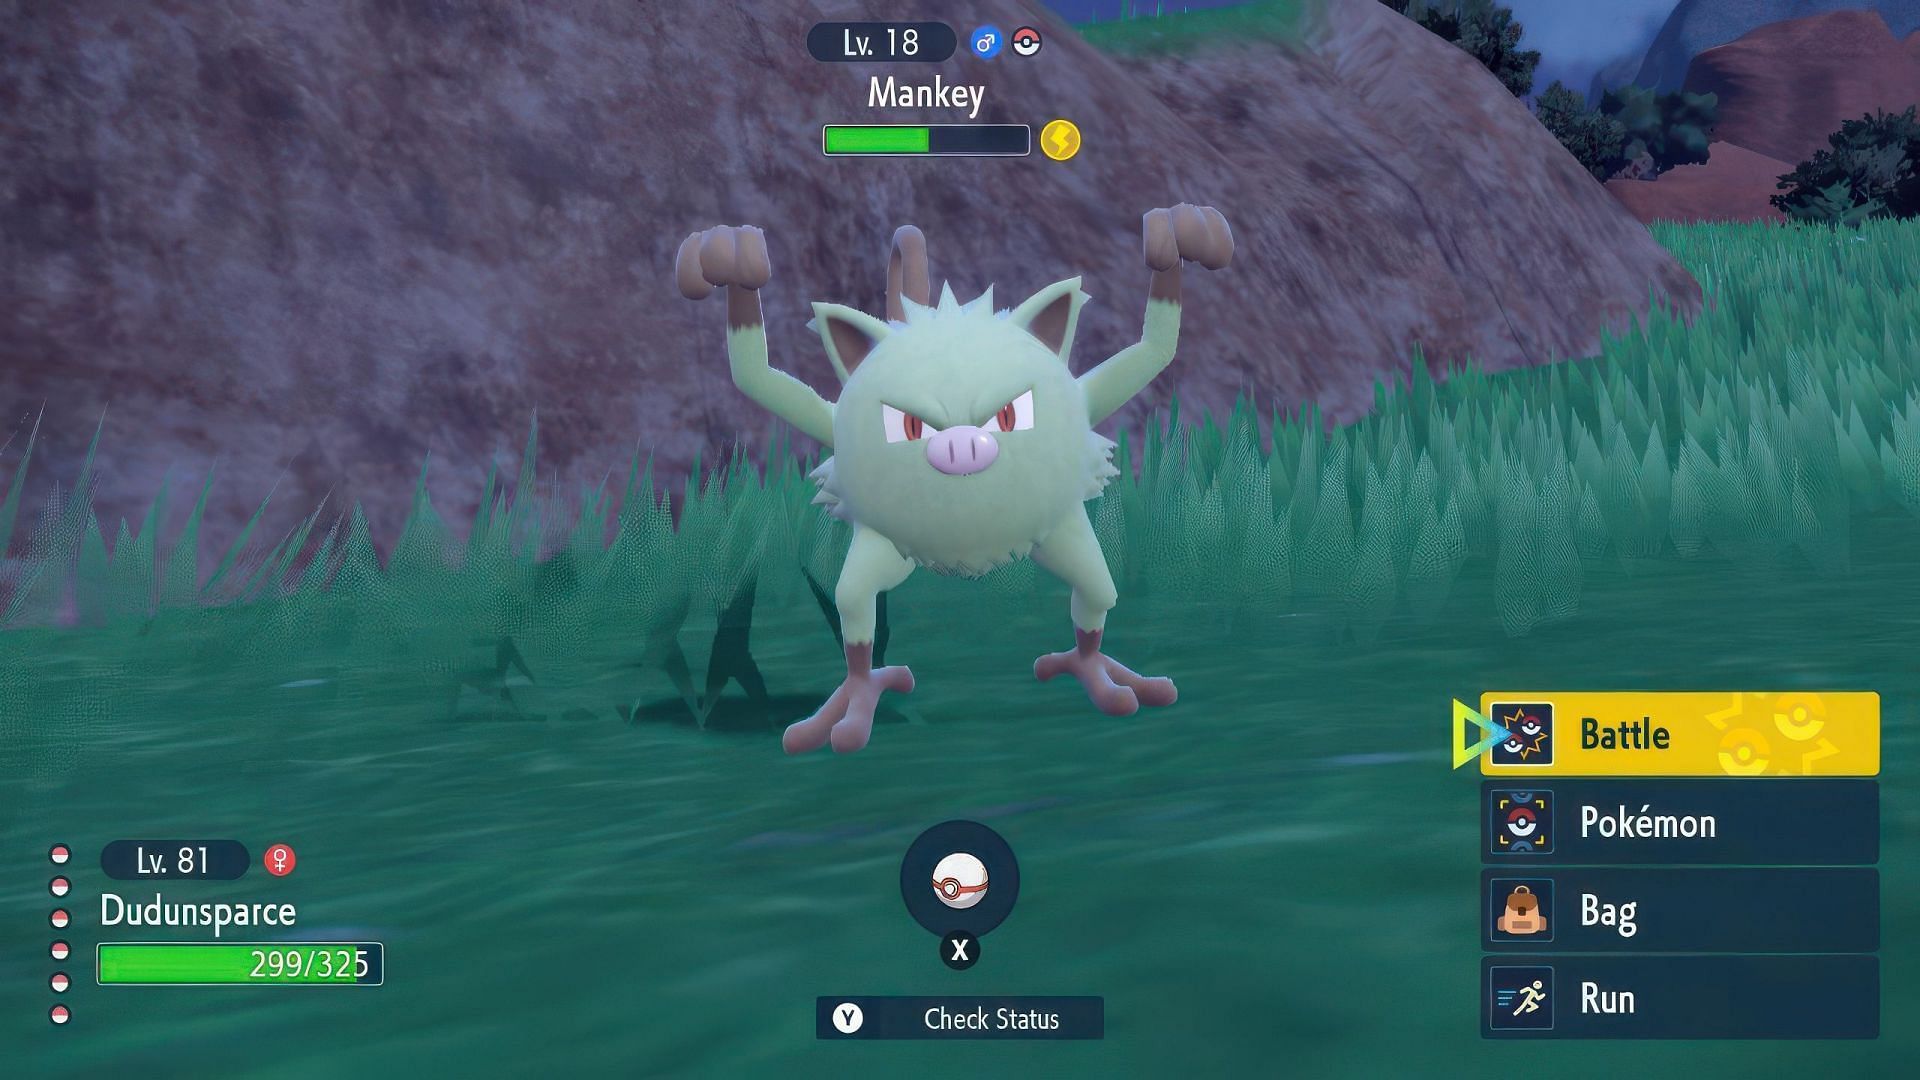 Shiny Mankey spotted in the wild